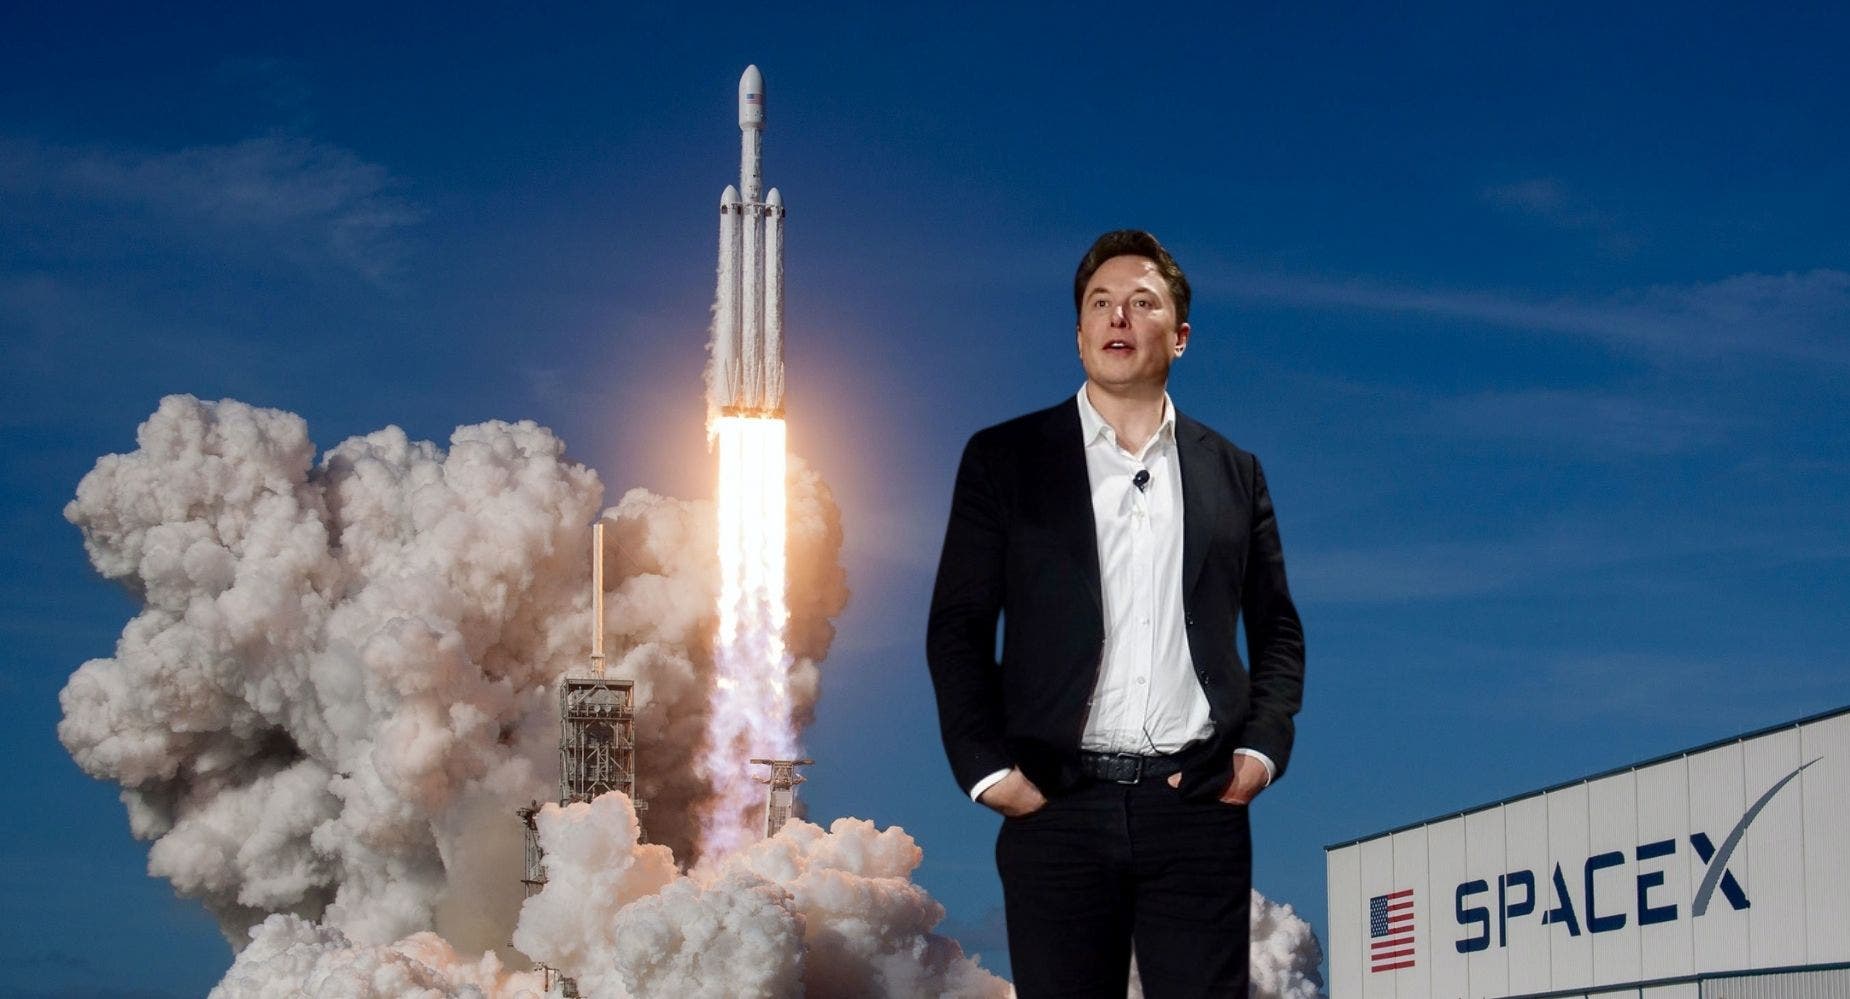 Elon Musk's SpaceX Raises $250M Through Fresh Equity Offering As Its Valuation Soars